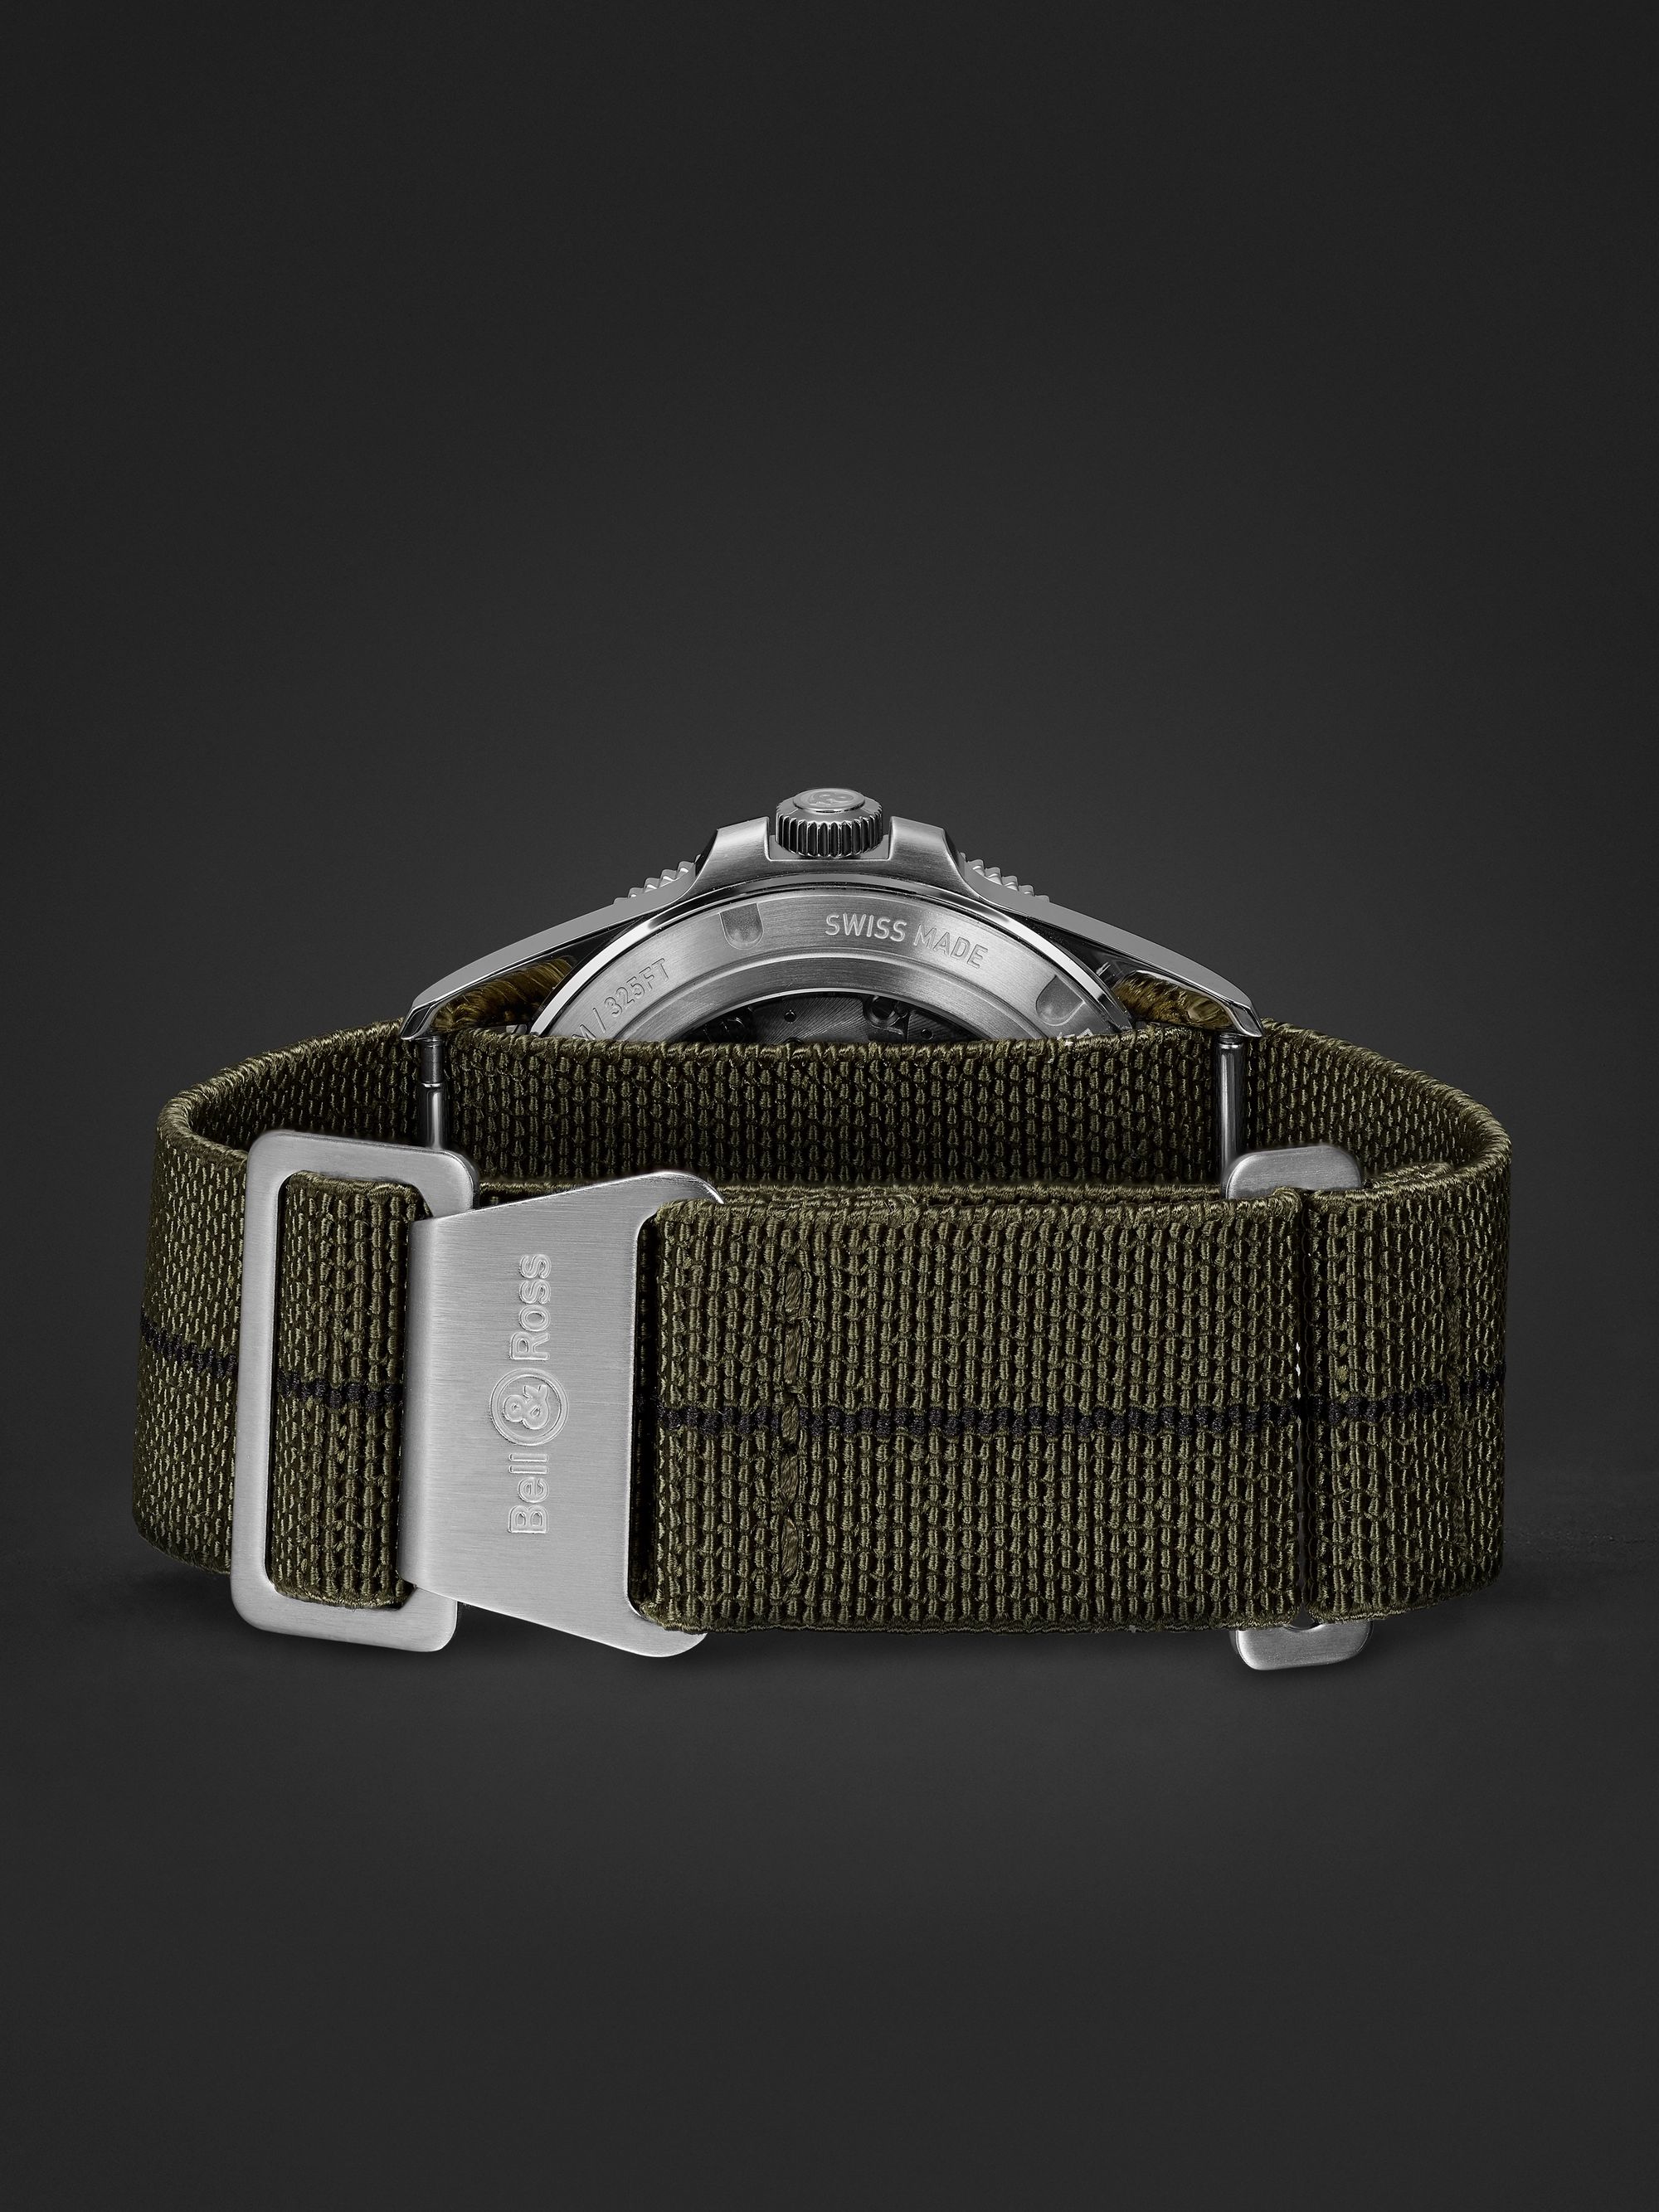 BELL & ROSS BR V2-92 Military Green Automatic 41mm Stainless Steel and Canvas Watch, Ref. No. BRV292-MKA-ST/SF